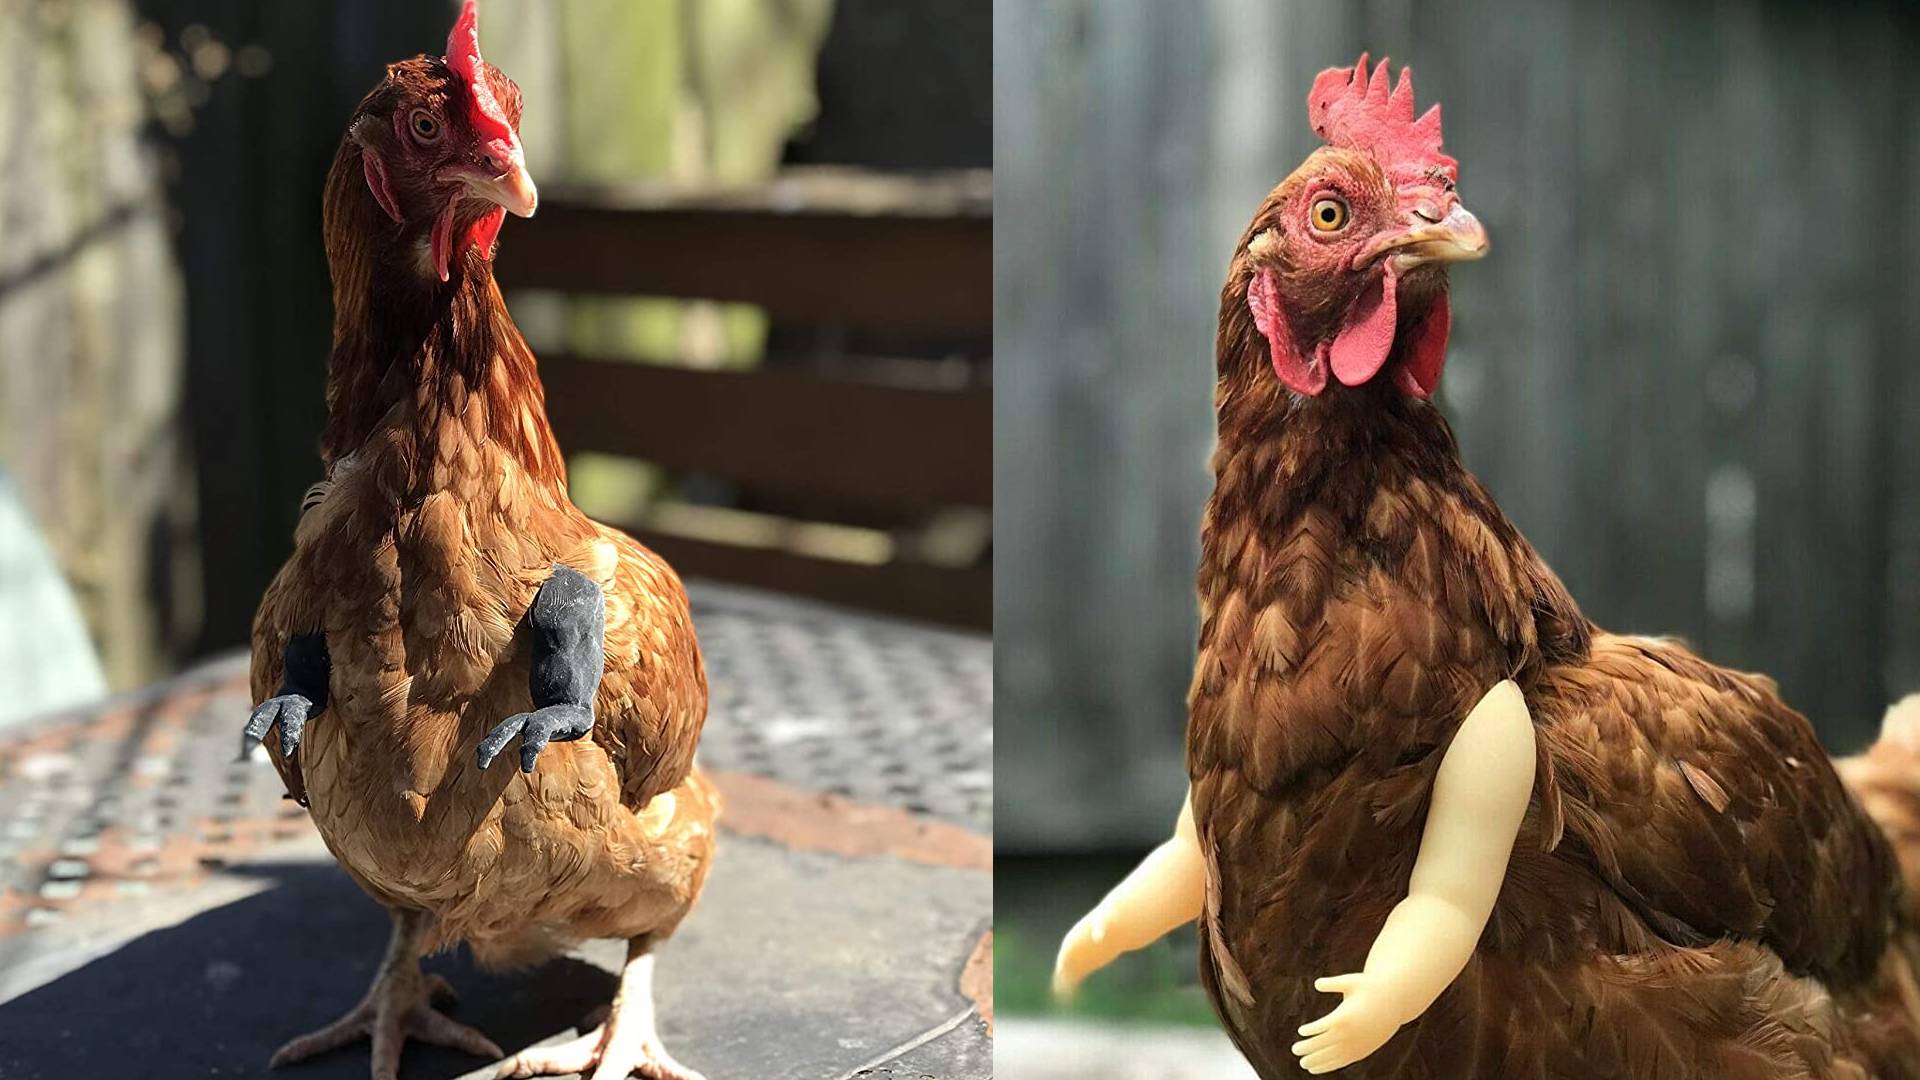 trex arms for chickens